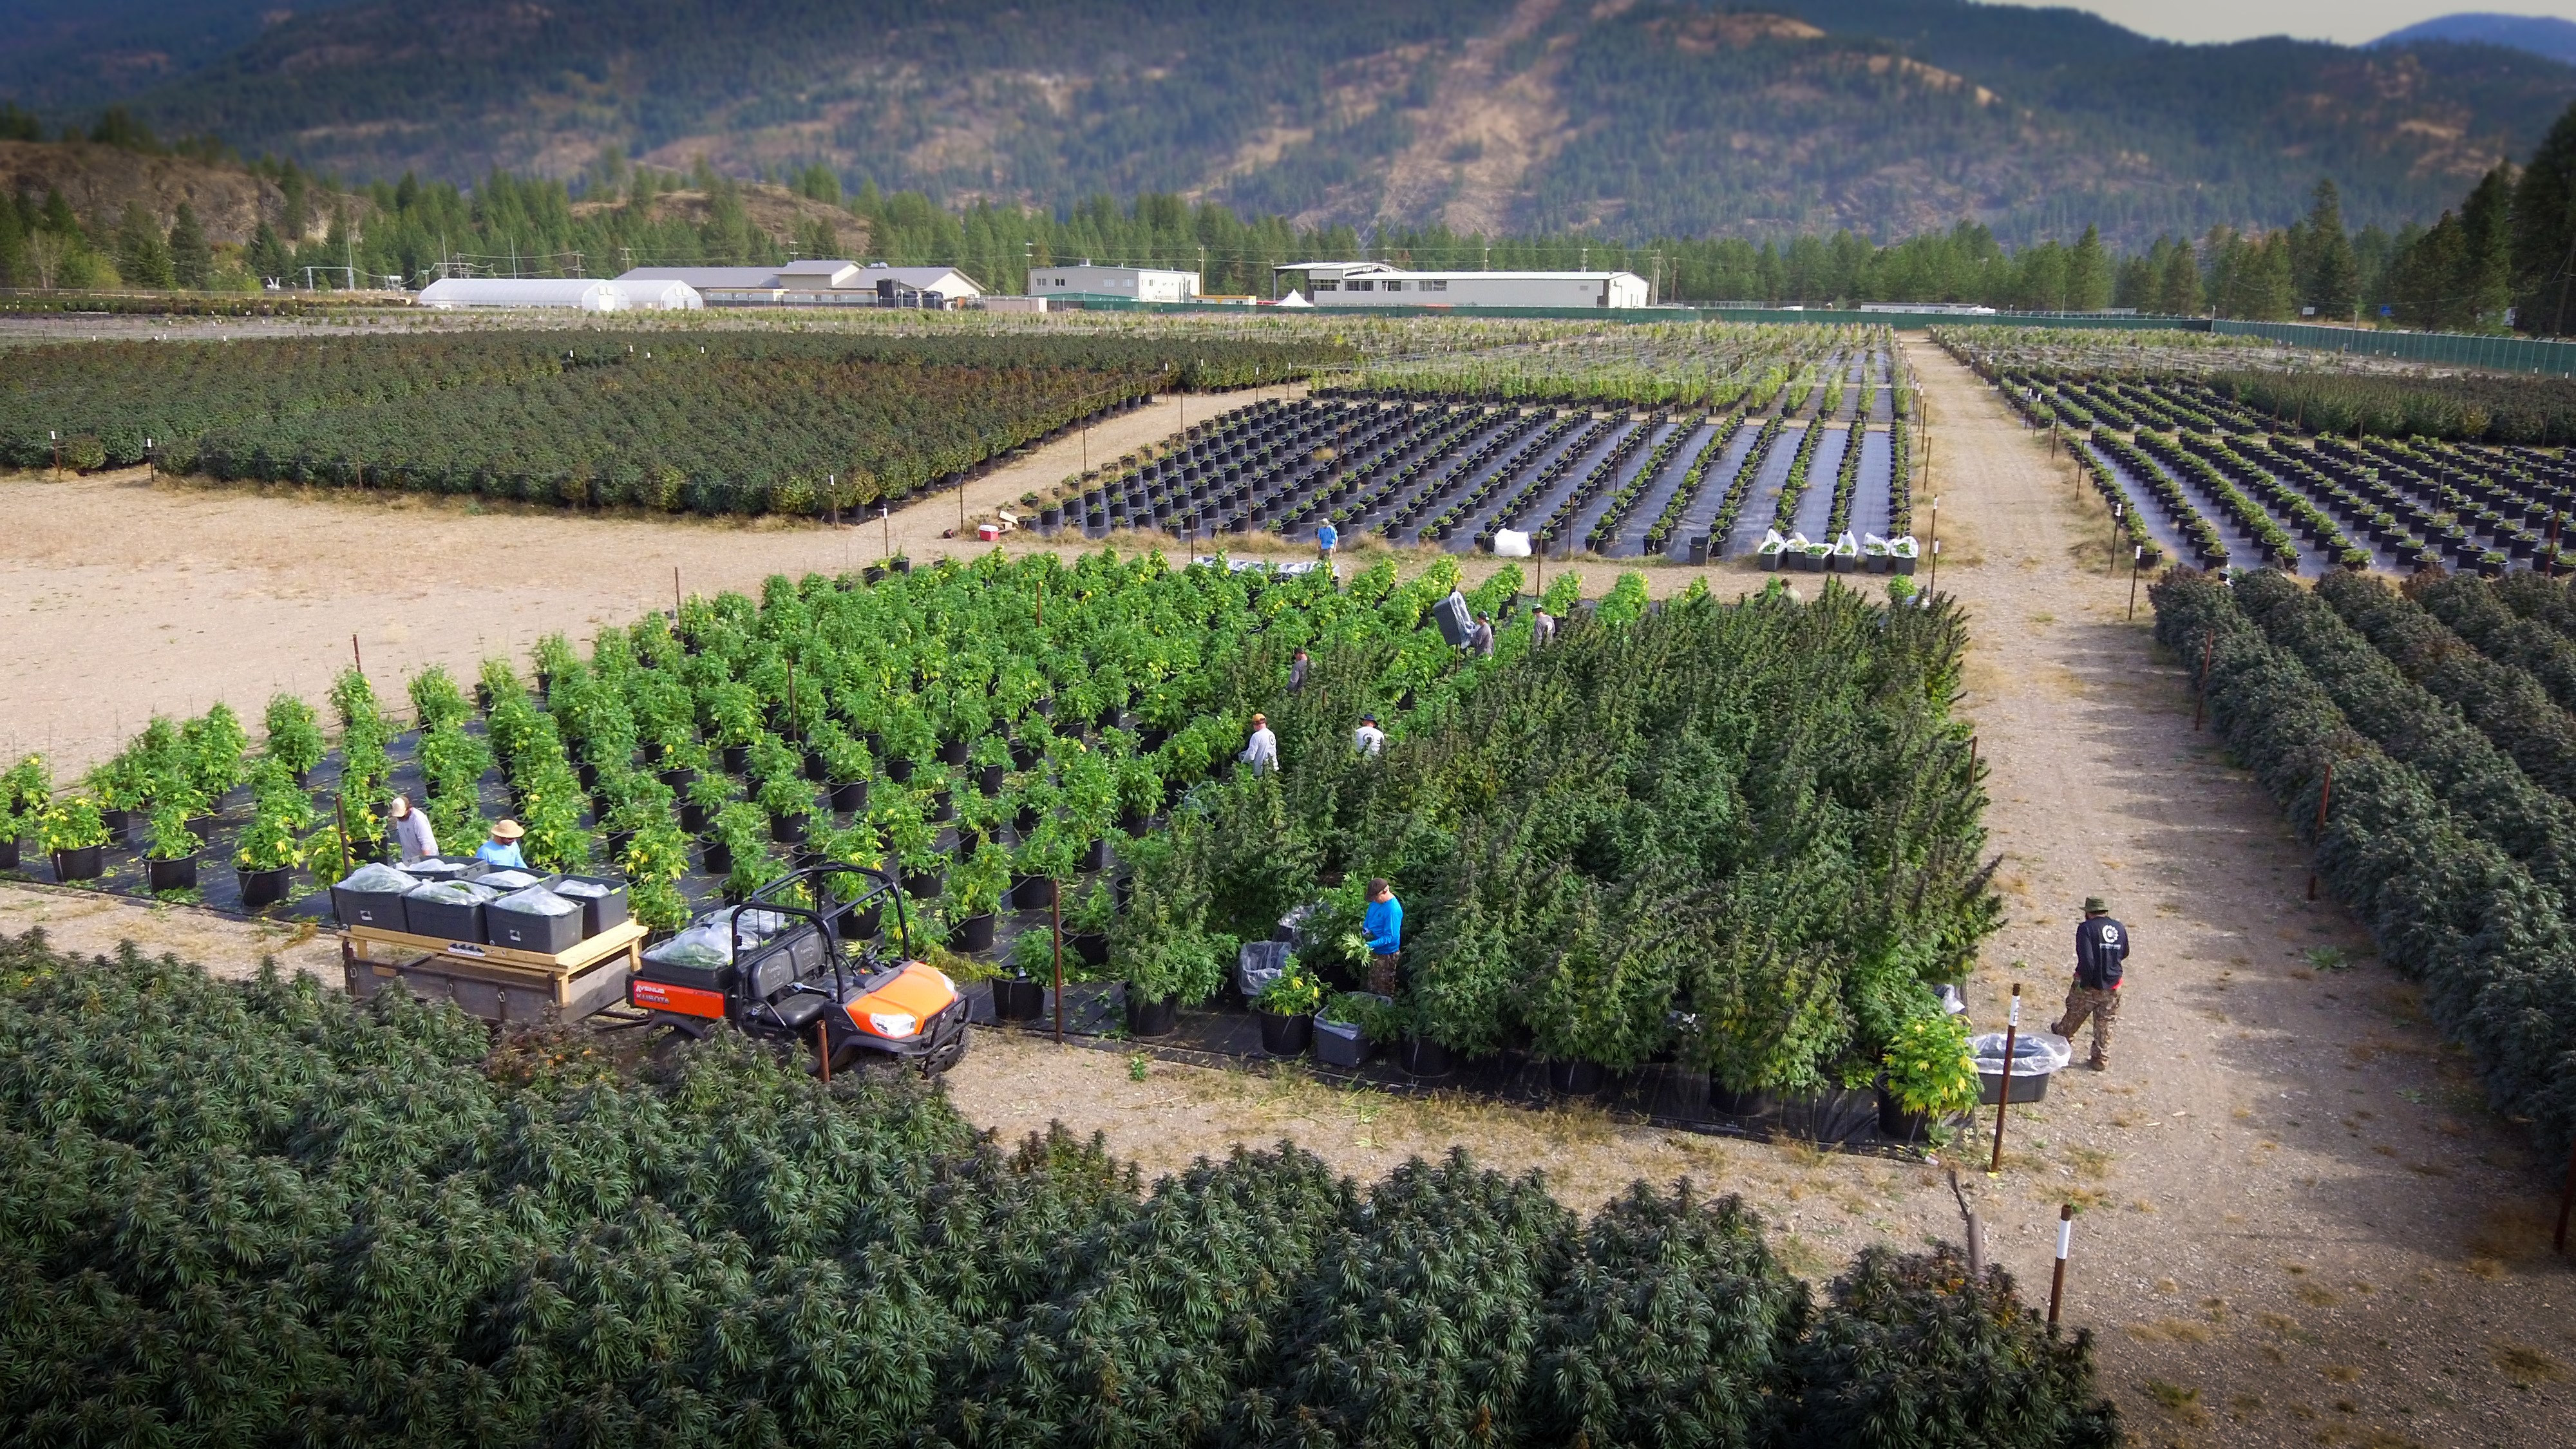 Outdoor cultivation at Christina Lake Cannabis Corp.